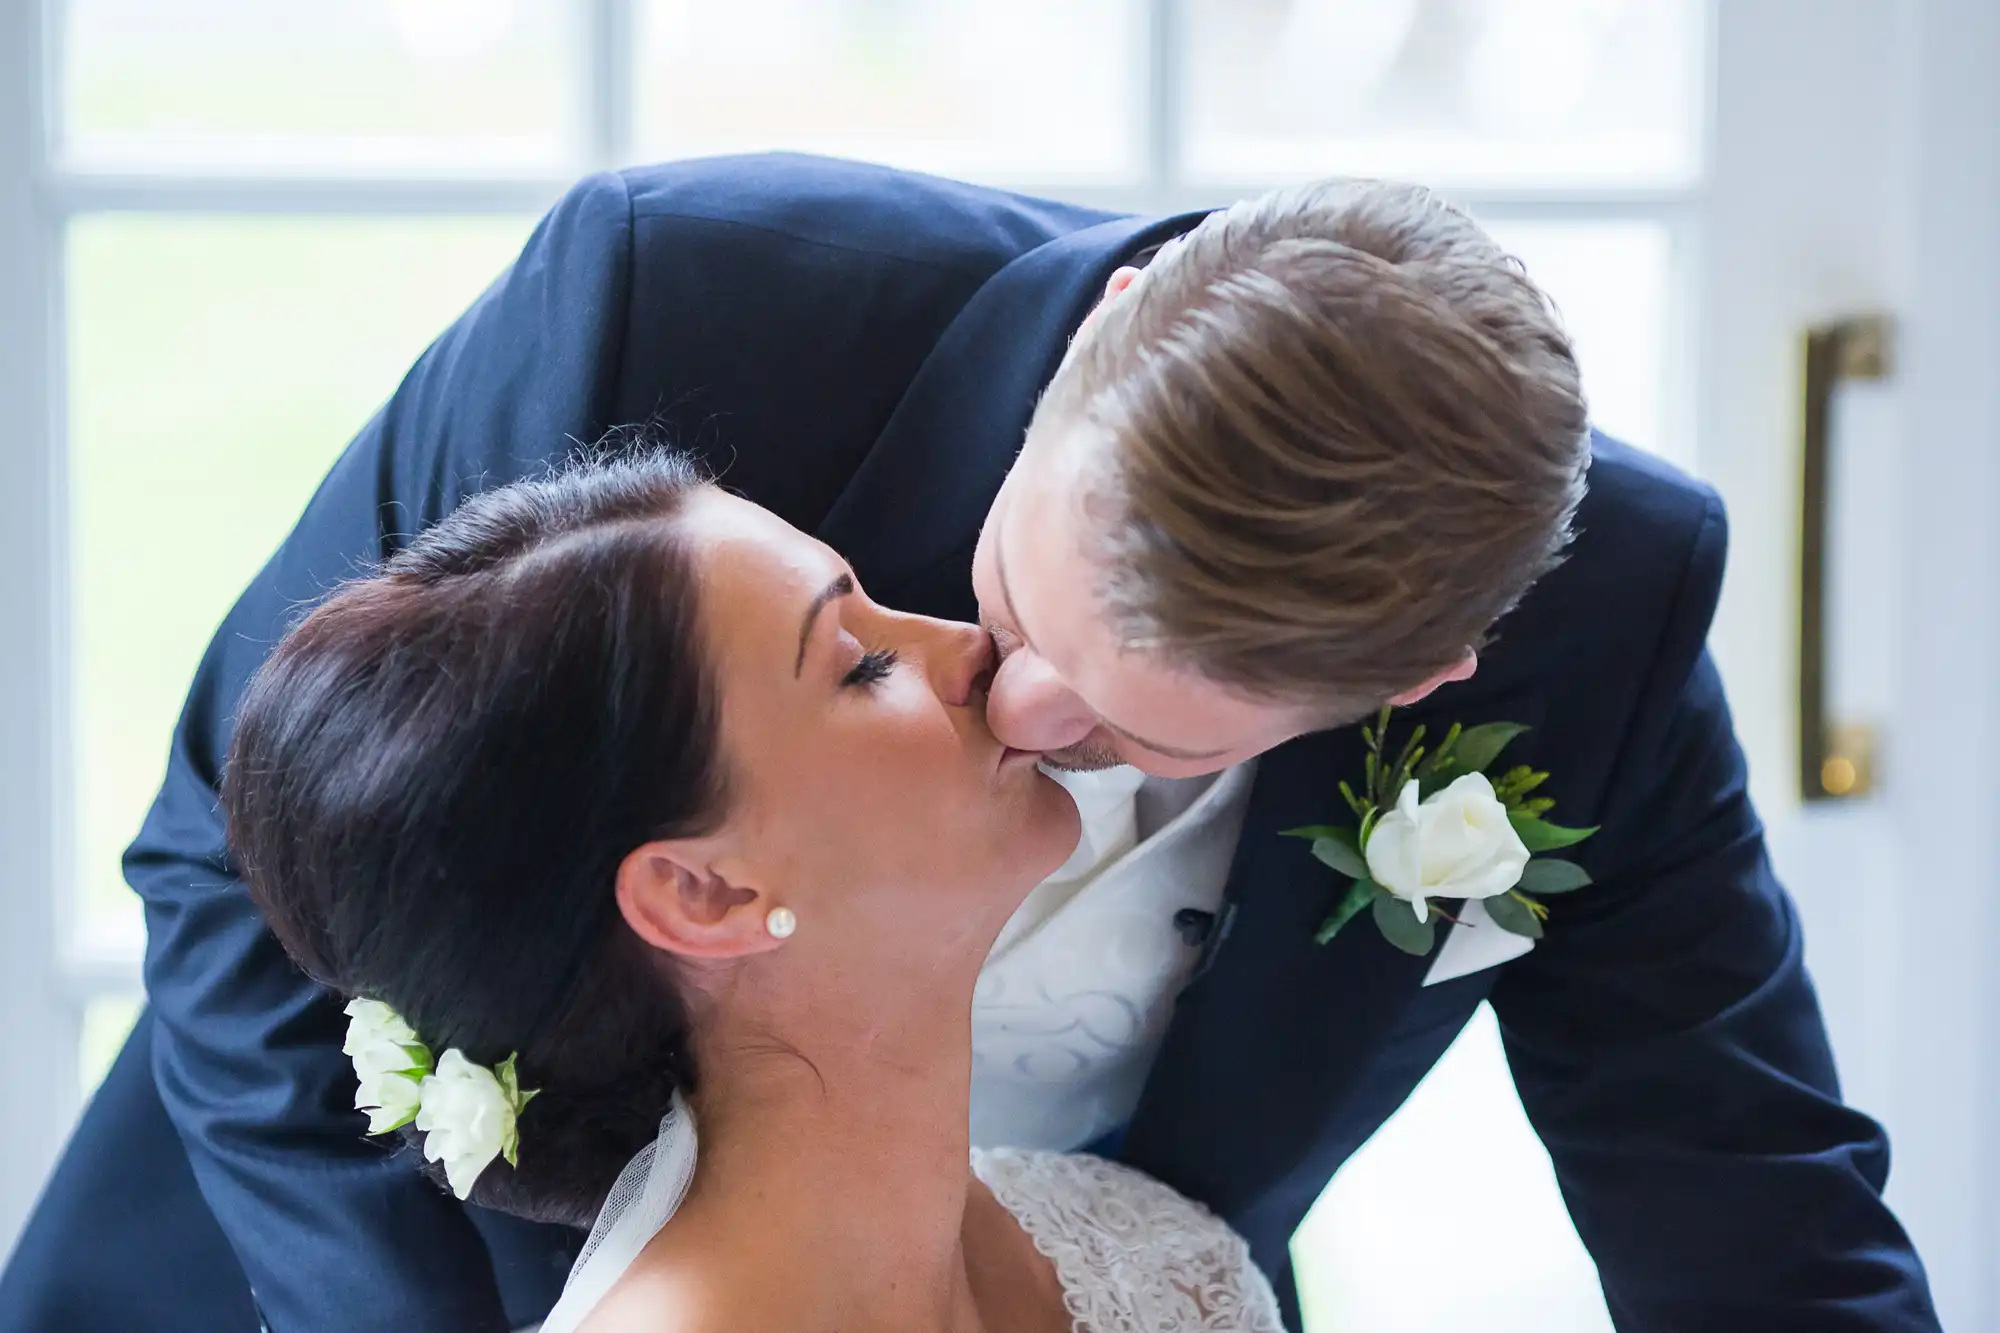 A groom bending down to kiss his bride on the forehead in a sunlit room.